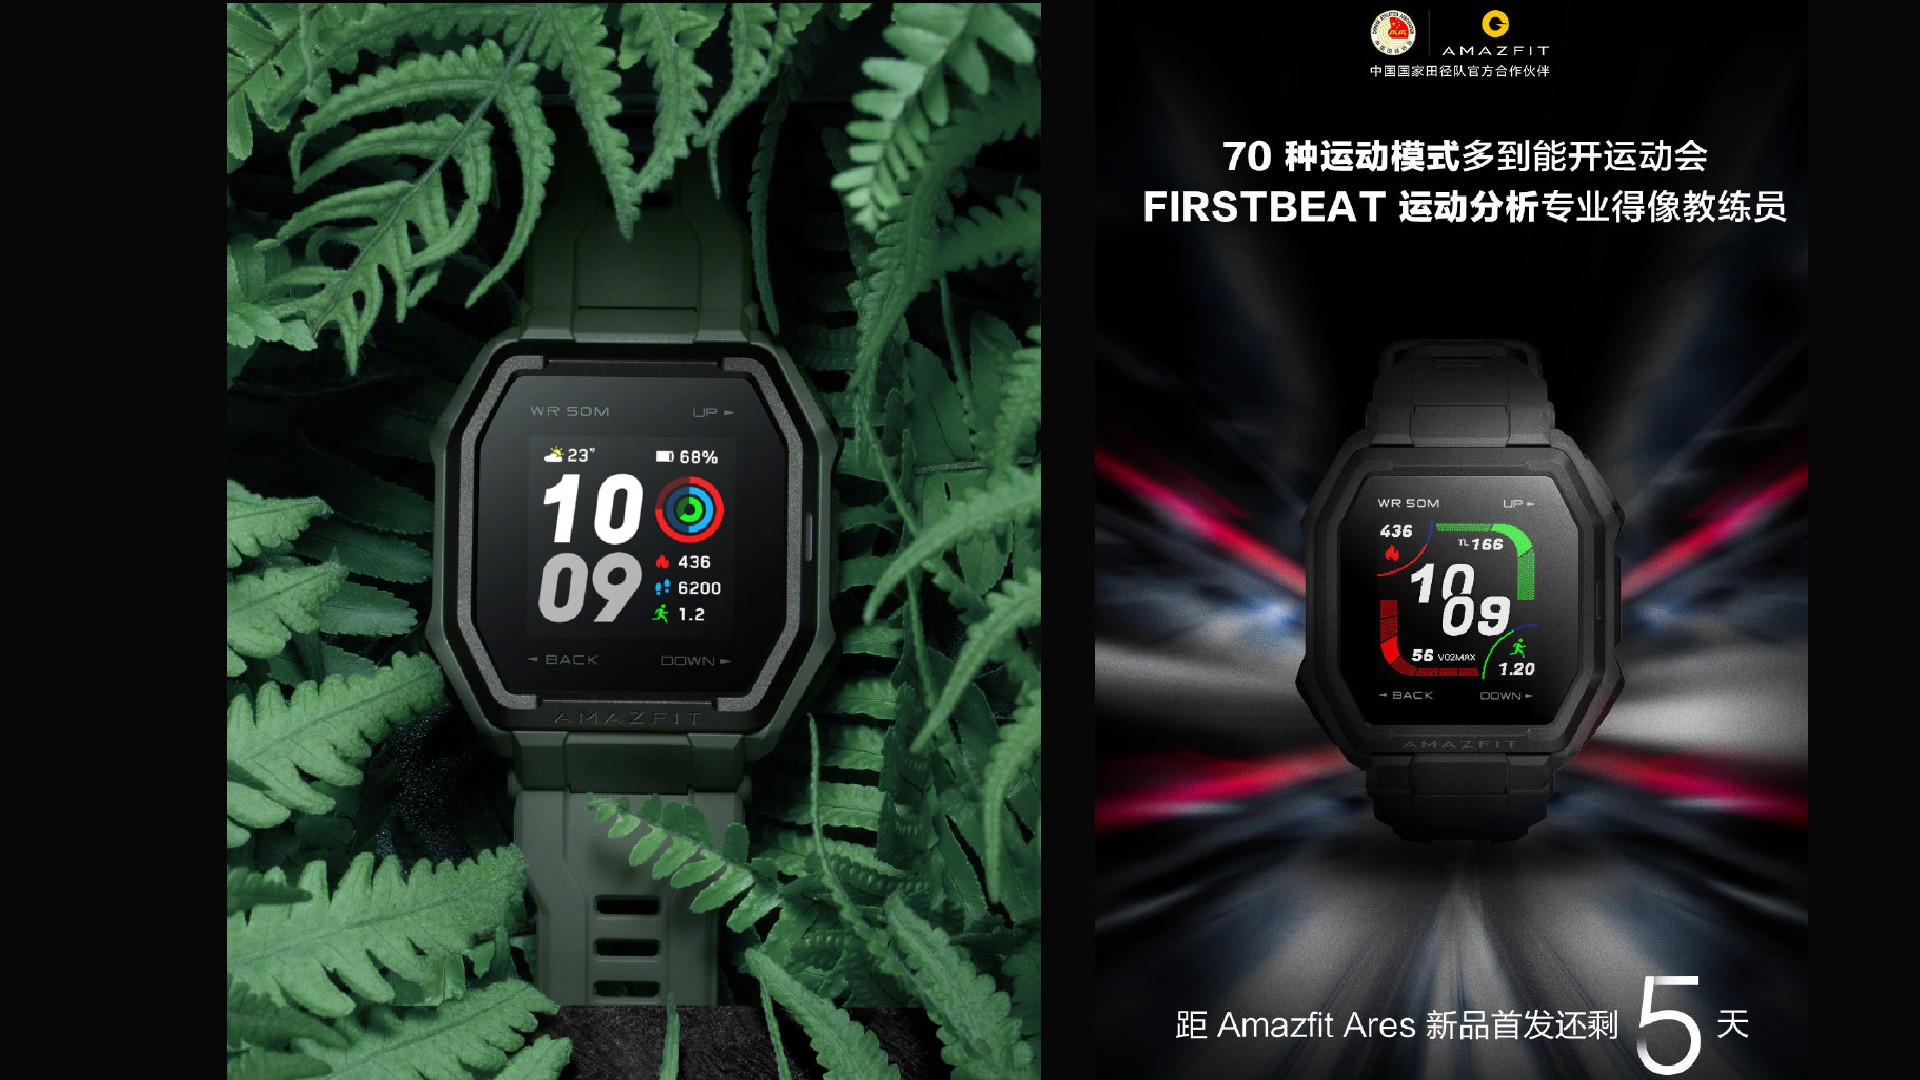 Mi band-maker Huami teases Amazfit Ares smartwatch launch for May 19